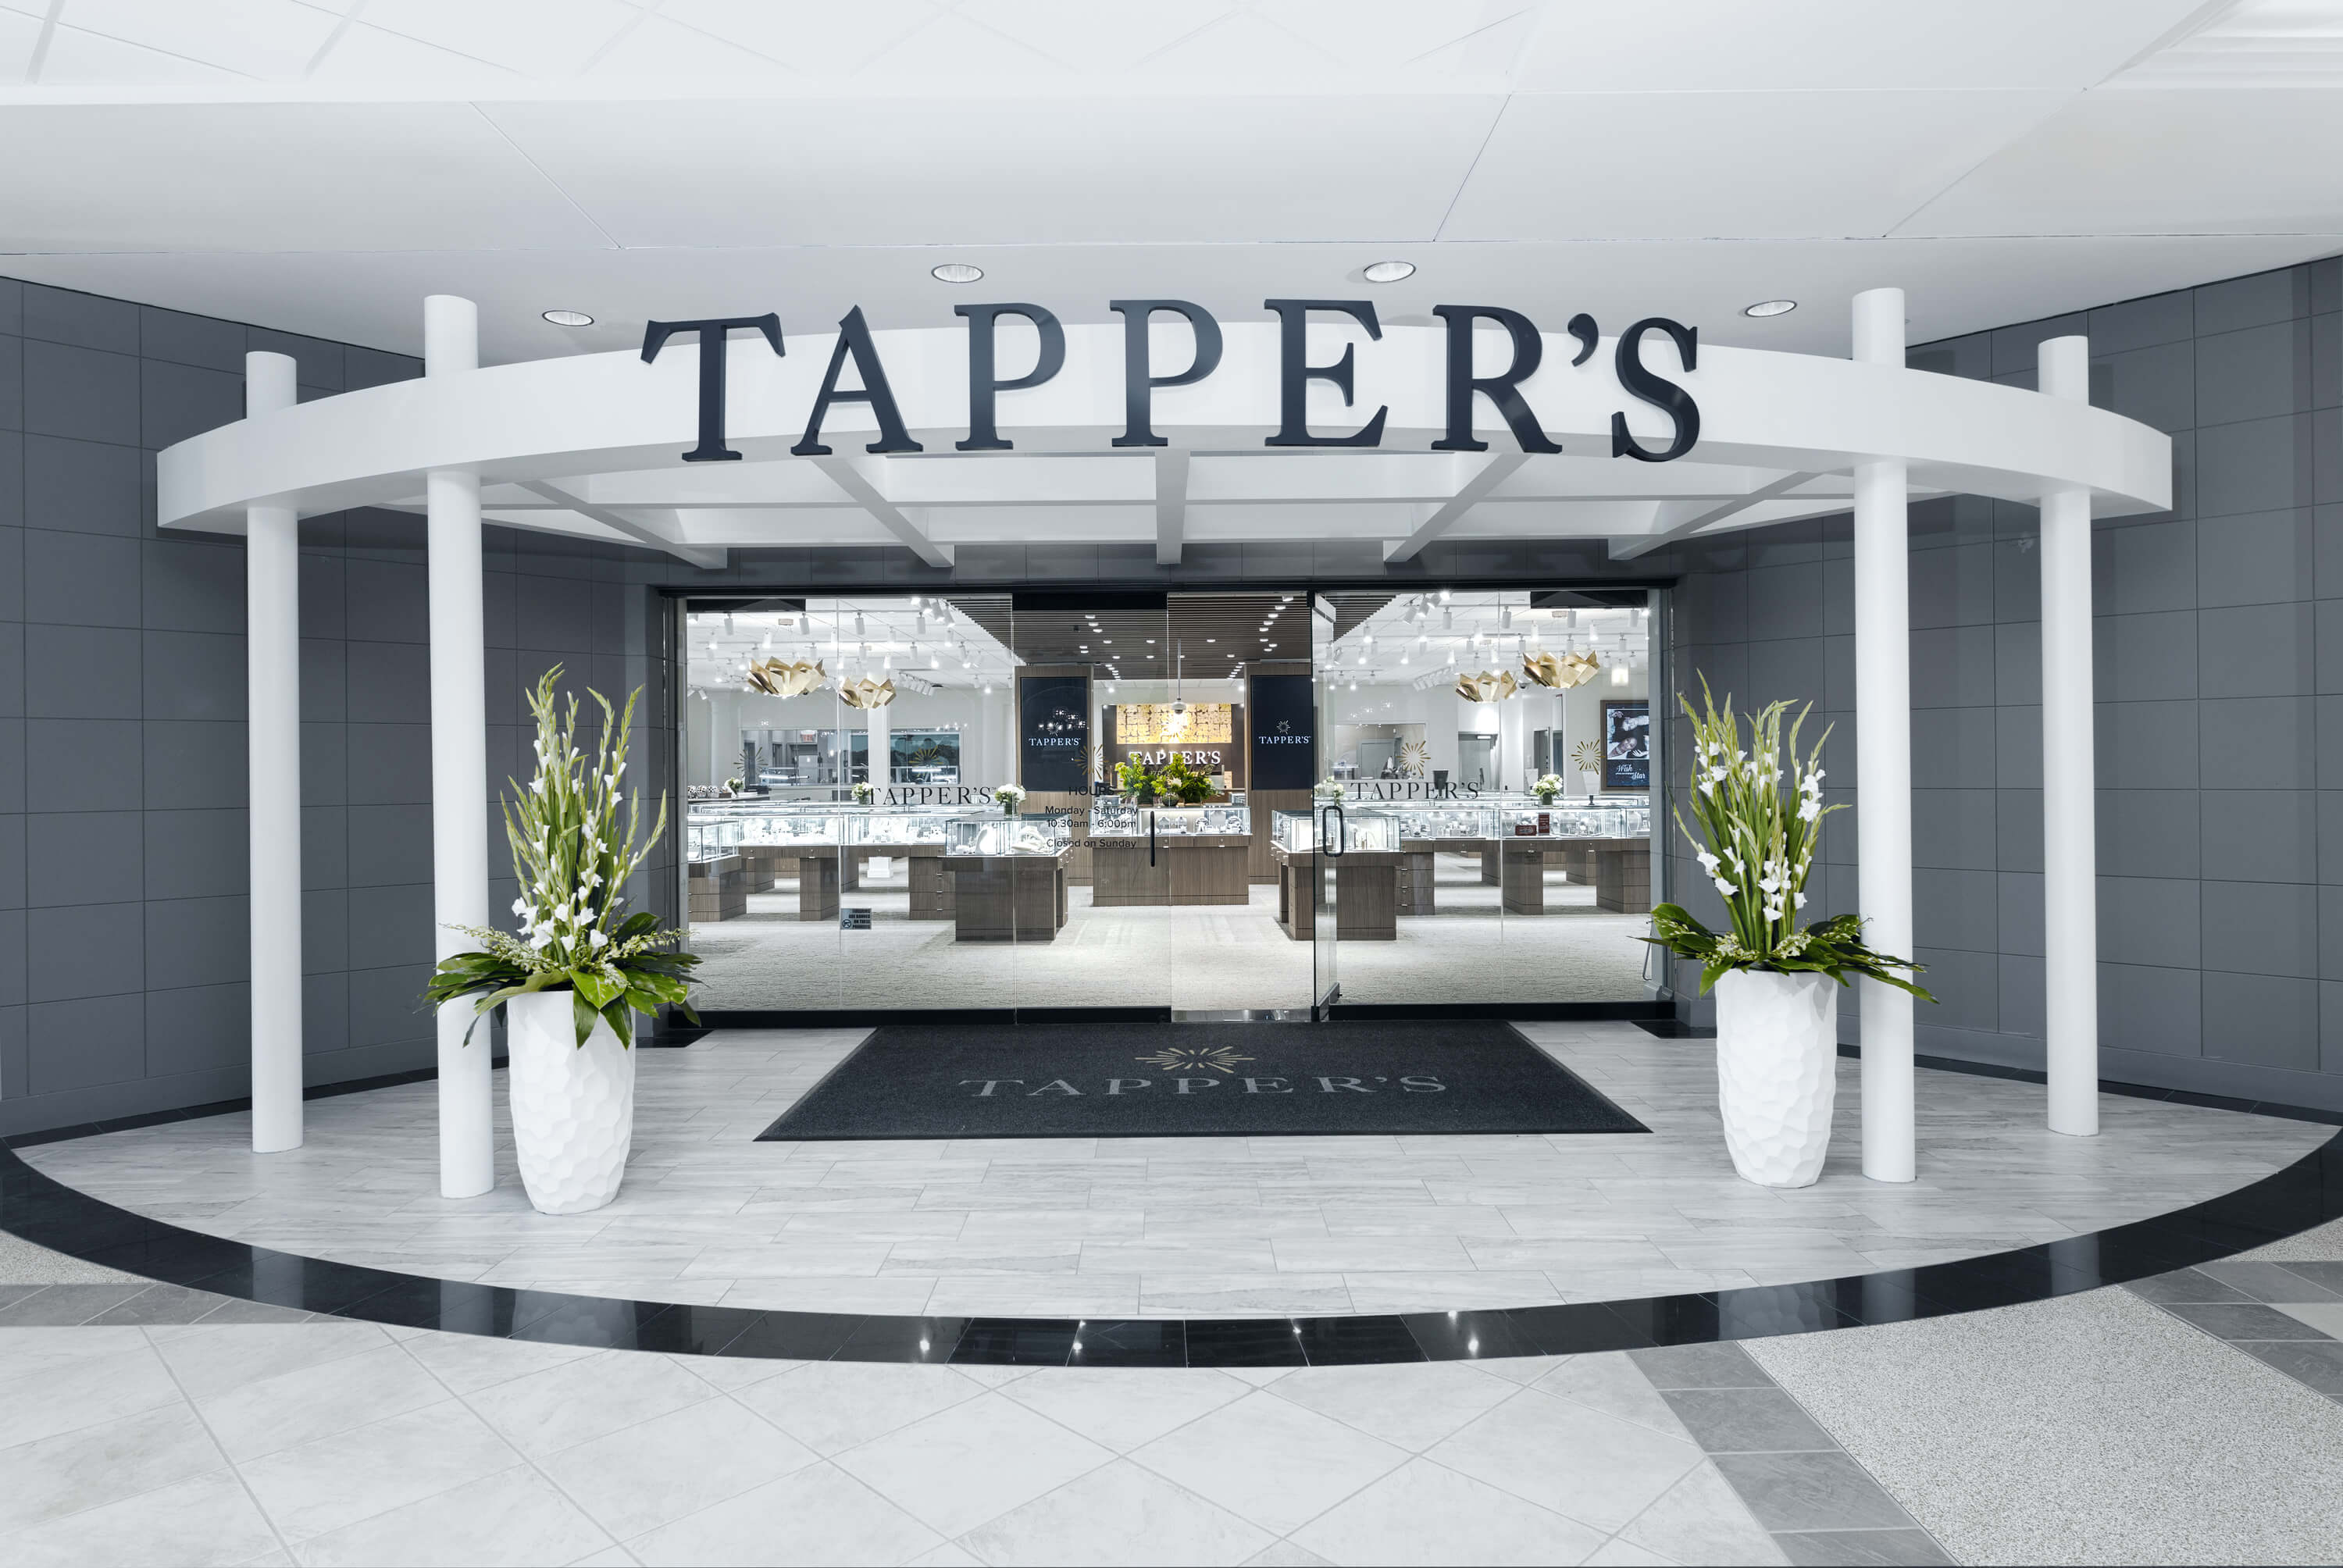 Tapper's West Bloomfield Entrance in Orchard Lake Mall. Gray tiled wall with white pillars frame the Tapper's logo. Tall white planters with fresh green floral accent the space.